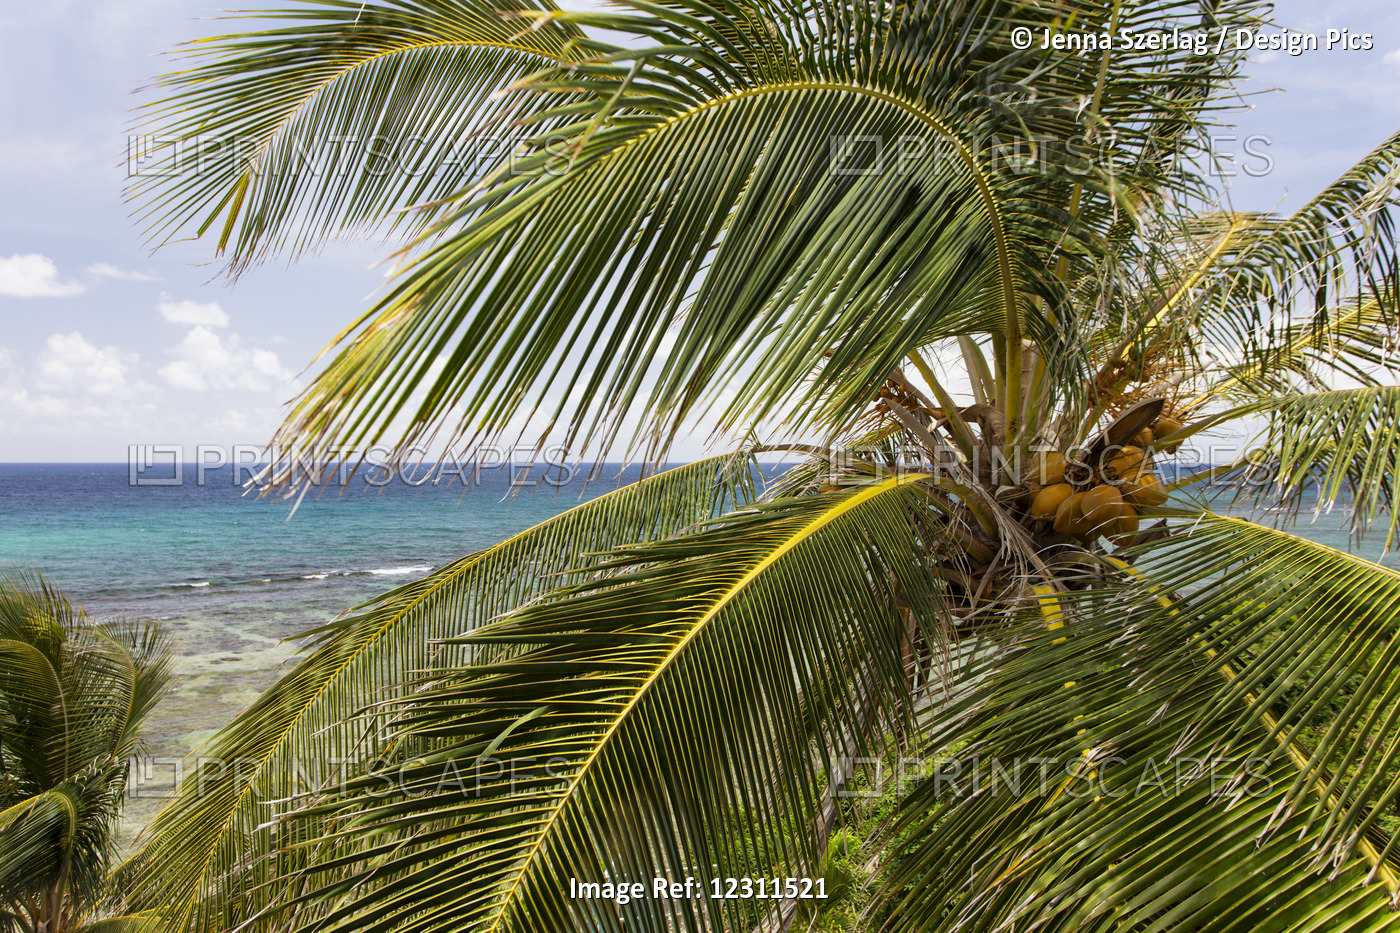 A Close Up Of A Palm Tree With Ocean; St. Croix, US Virgin Islands